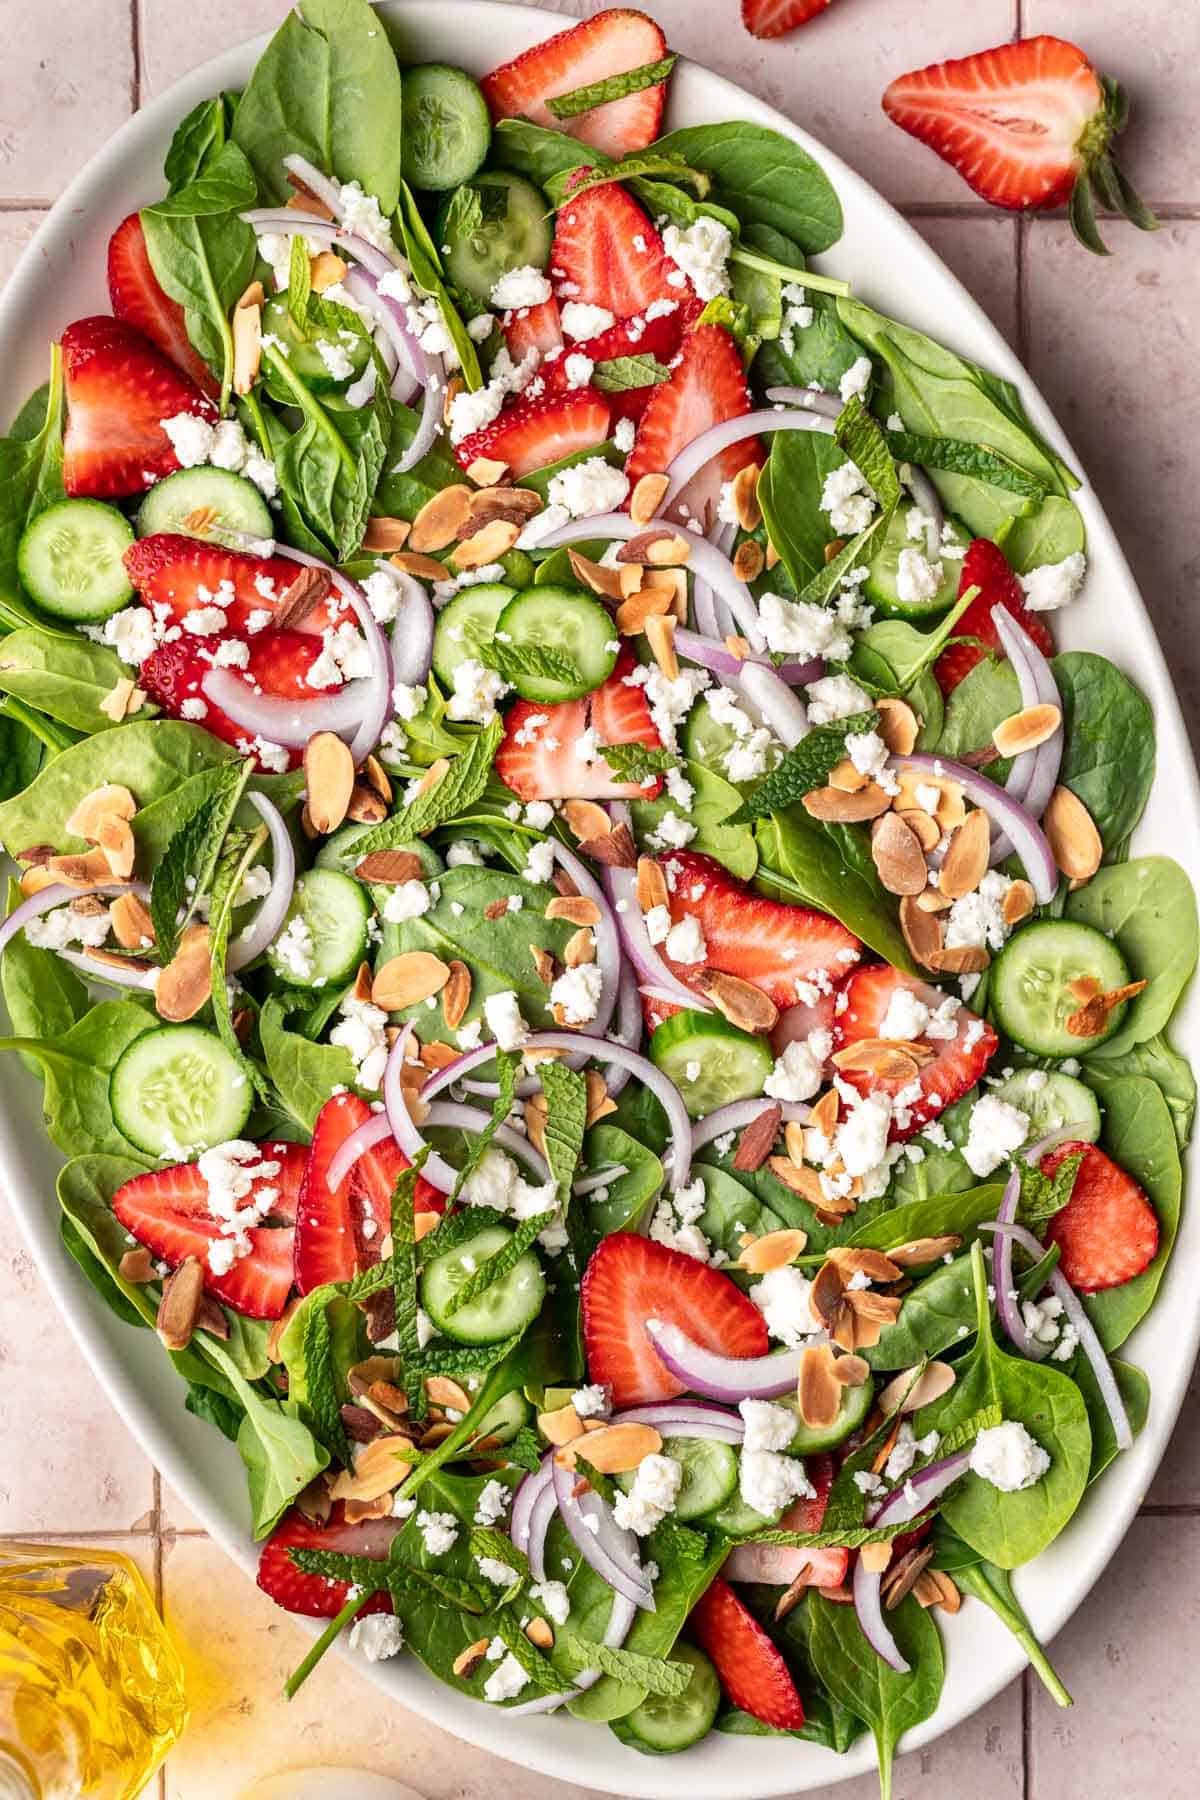 Strawberry cucumber salad with feta, red onions, strawberries, cucumbers, and greens.